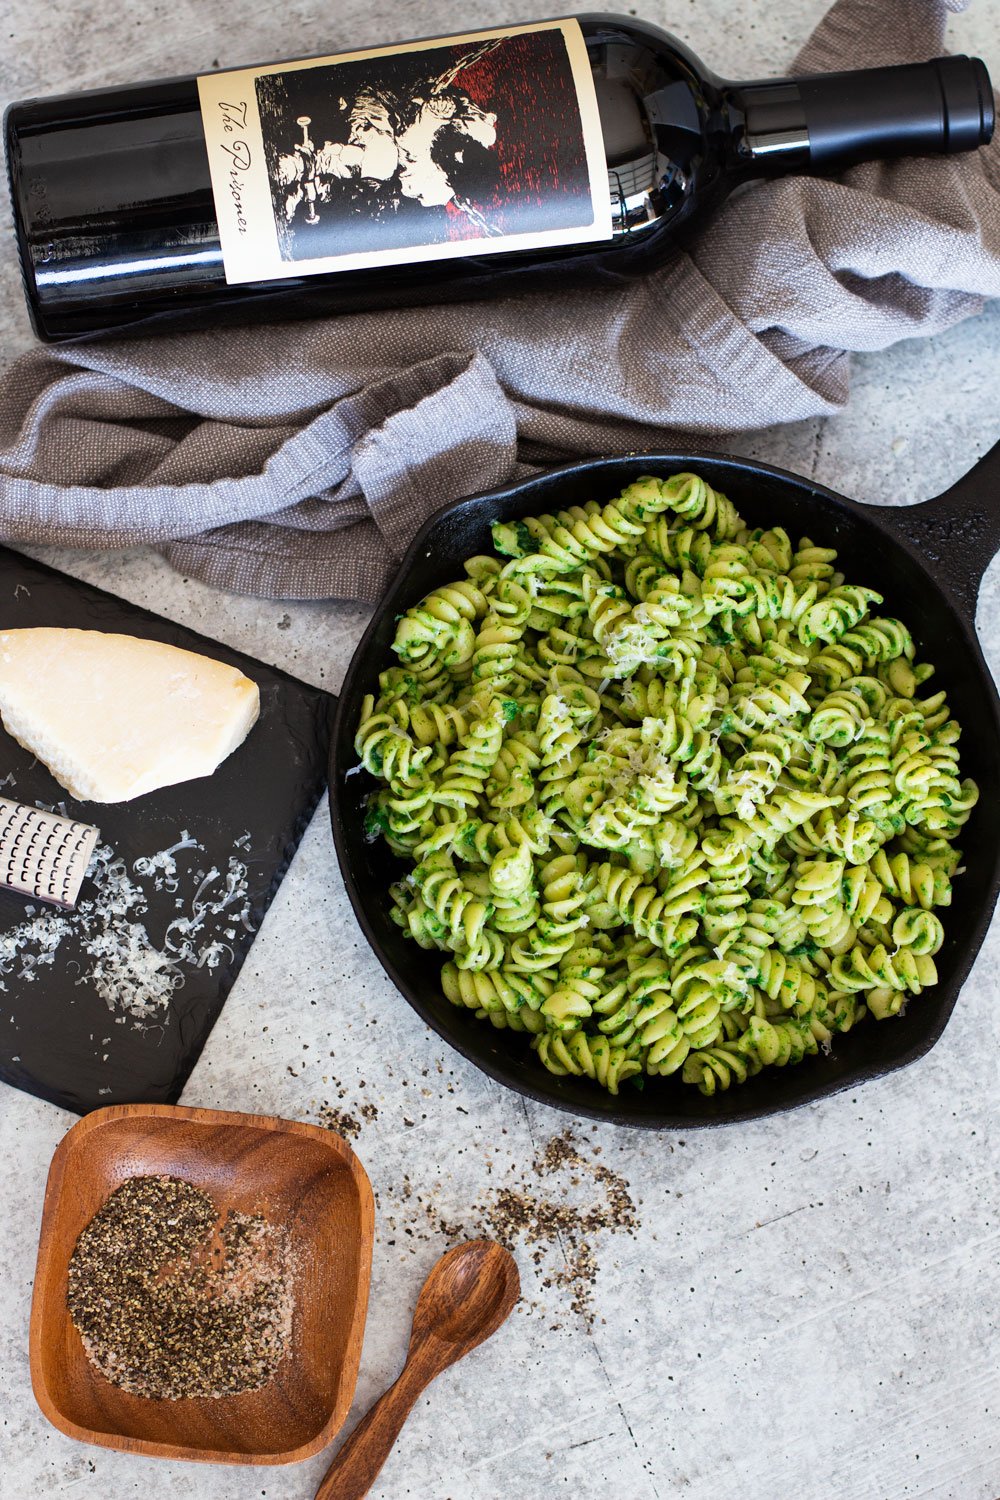 Skillet containing avocado pasta, wine, Parmesan cheese, and pepper on table.